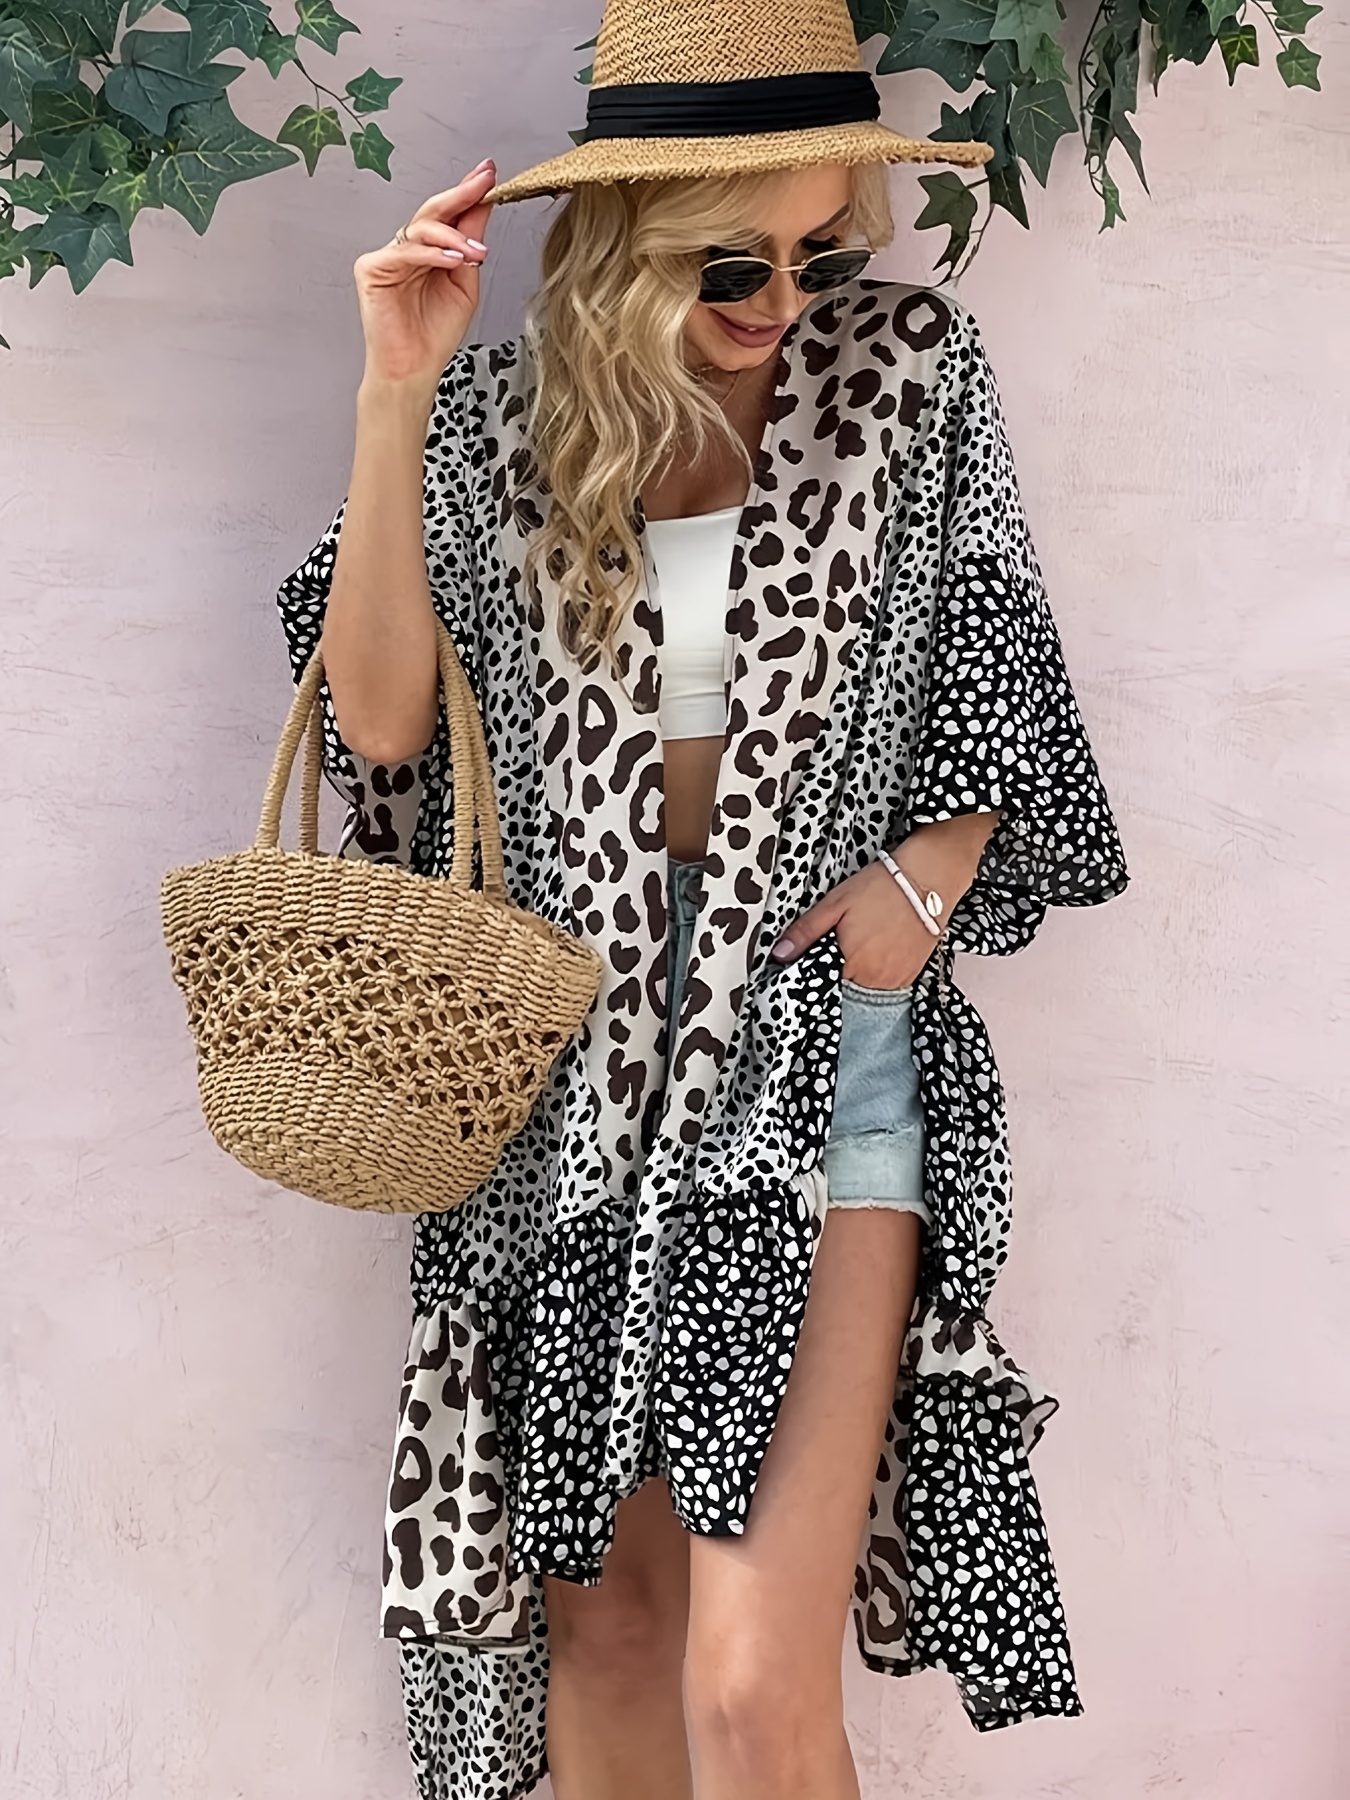 Leopard Print Cover Up Shirt: Style and Comfort